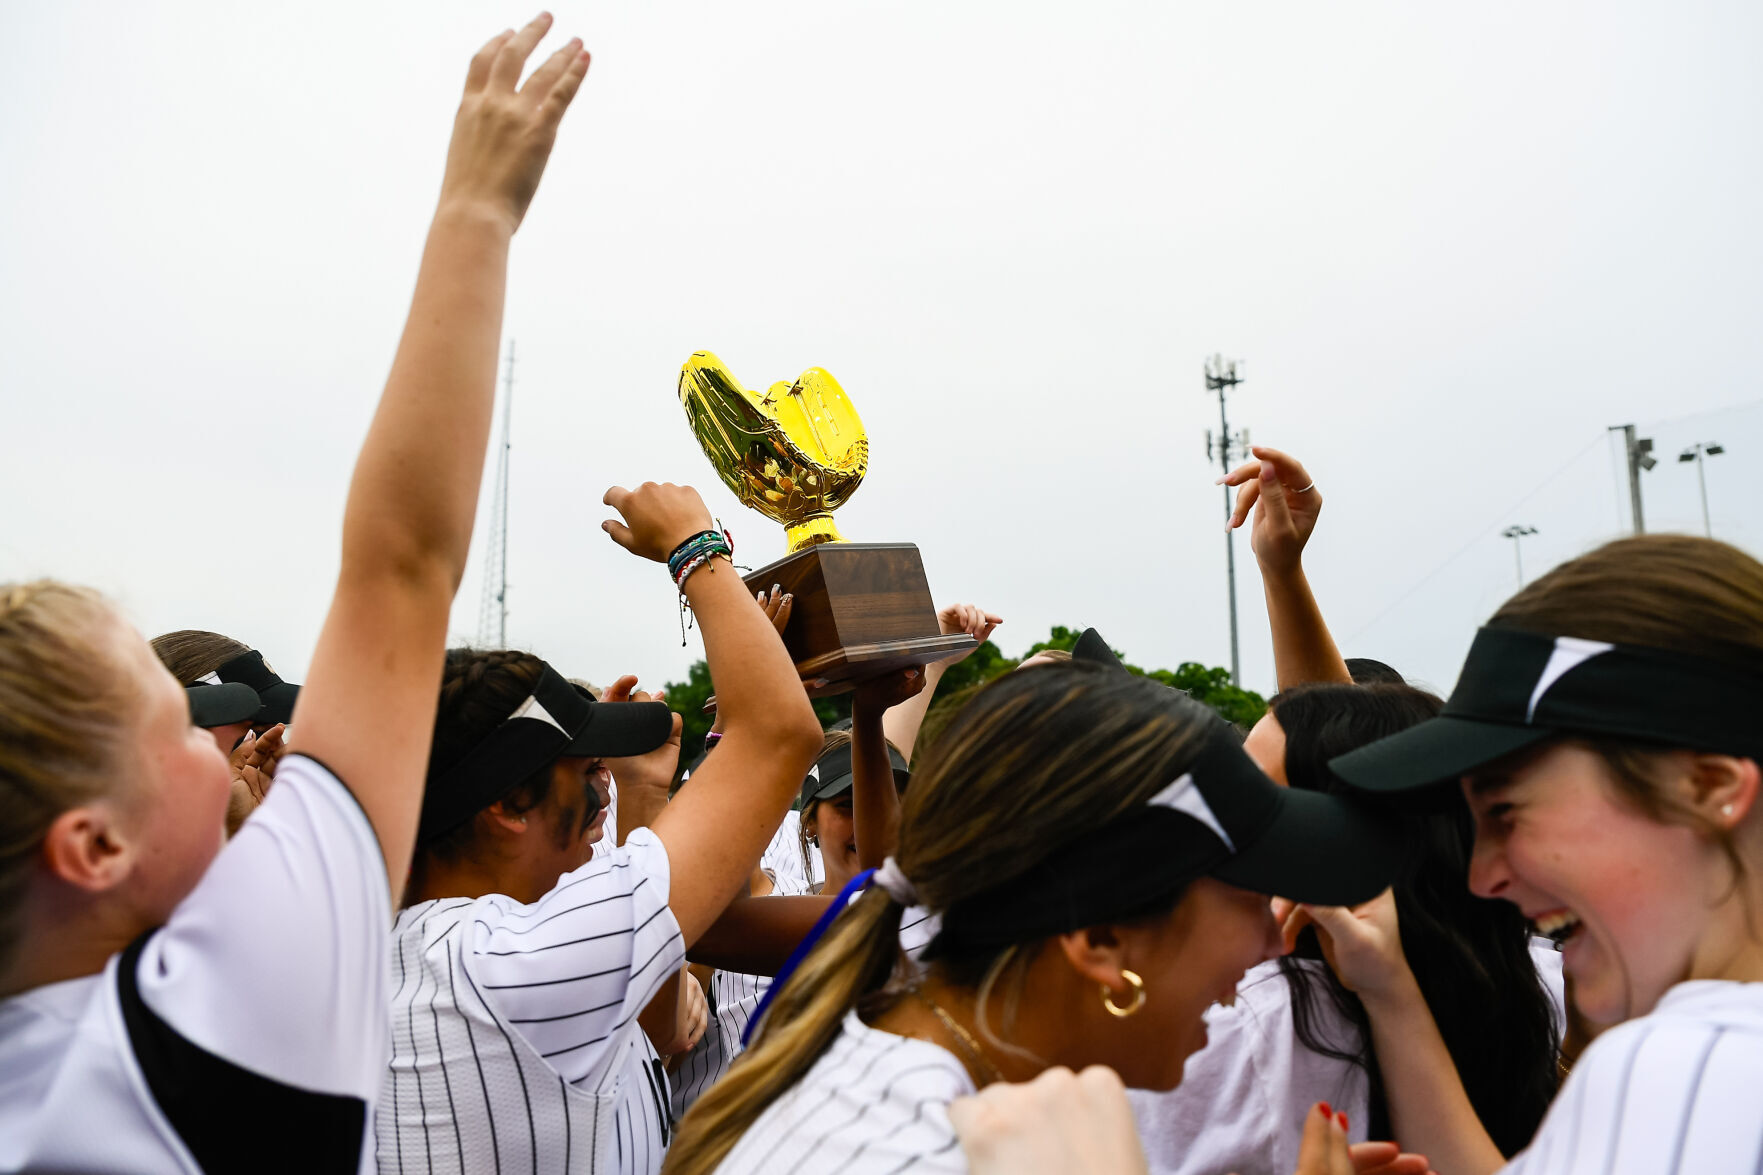 Softball Playoffs Recap: Guyer Advances with Shutout Win, Krum and Sanger Secure Victories